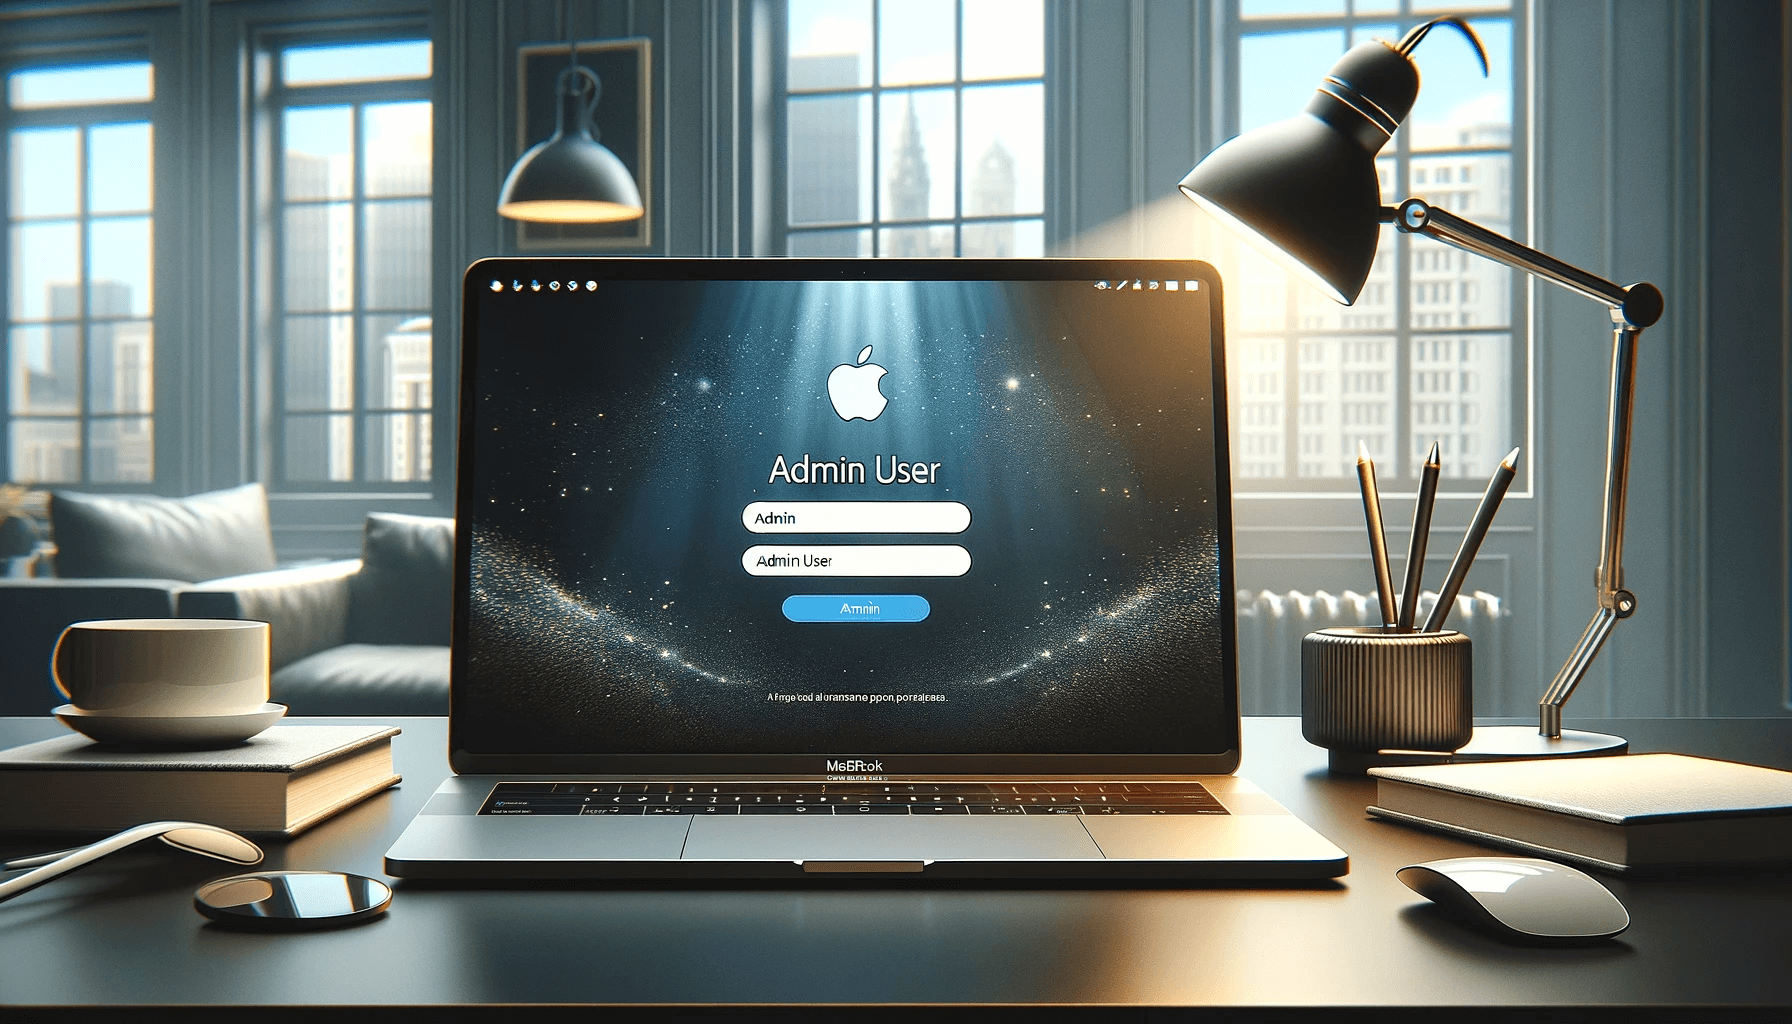 DALL·E 2023 11 14 17.18.16 A digital illustration of a MacBook screen displaying the admin name. The scene depicts a modern minimalist office setting. The MacBook is open on a 1